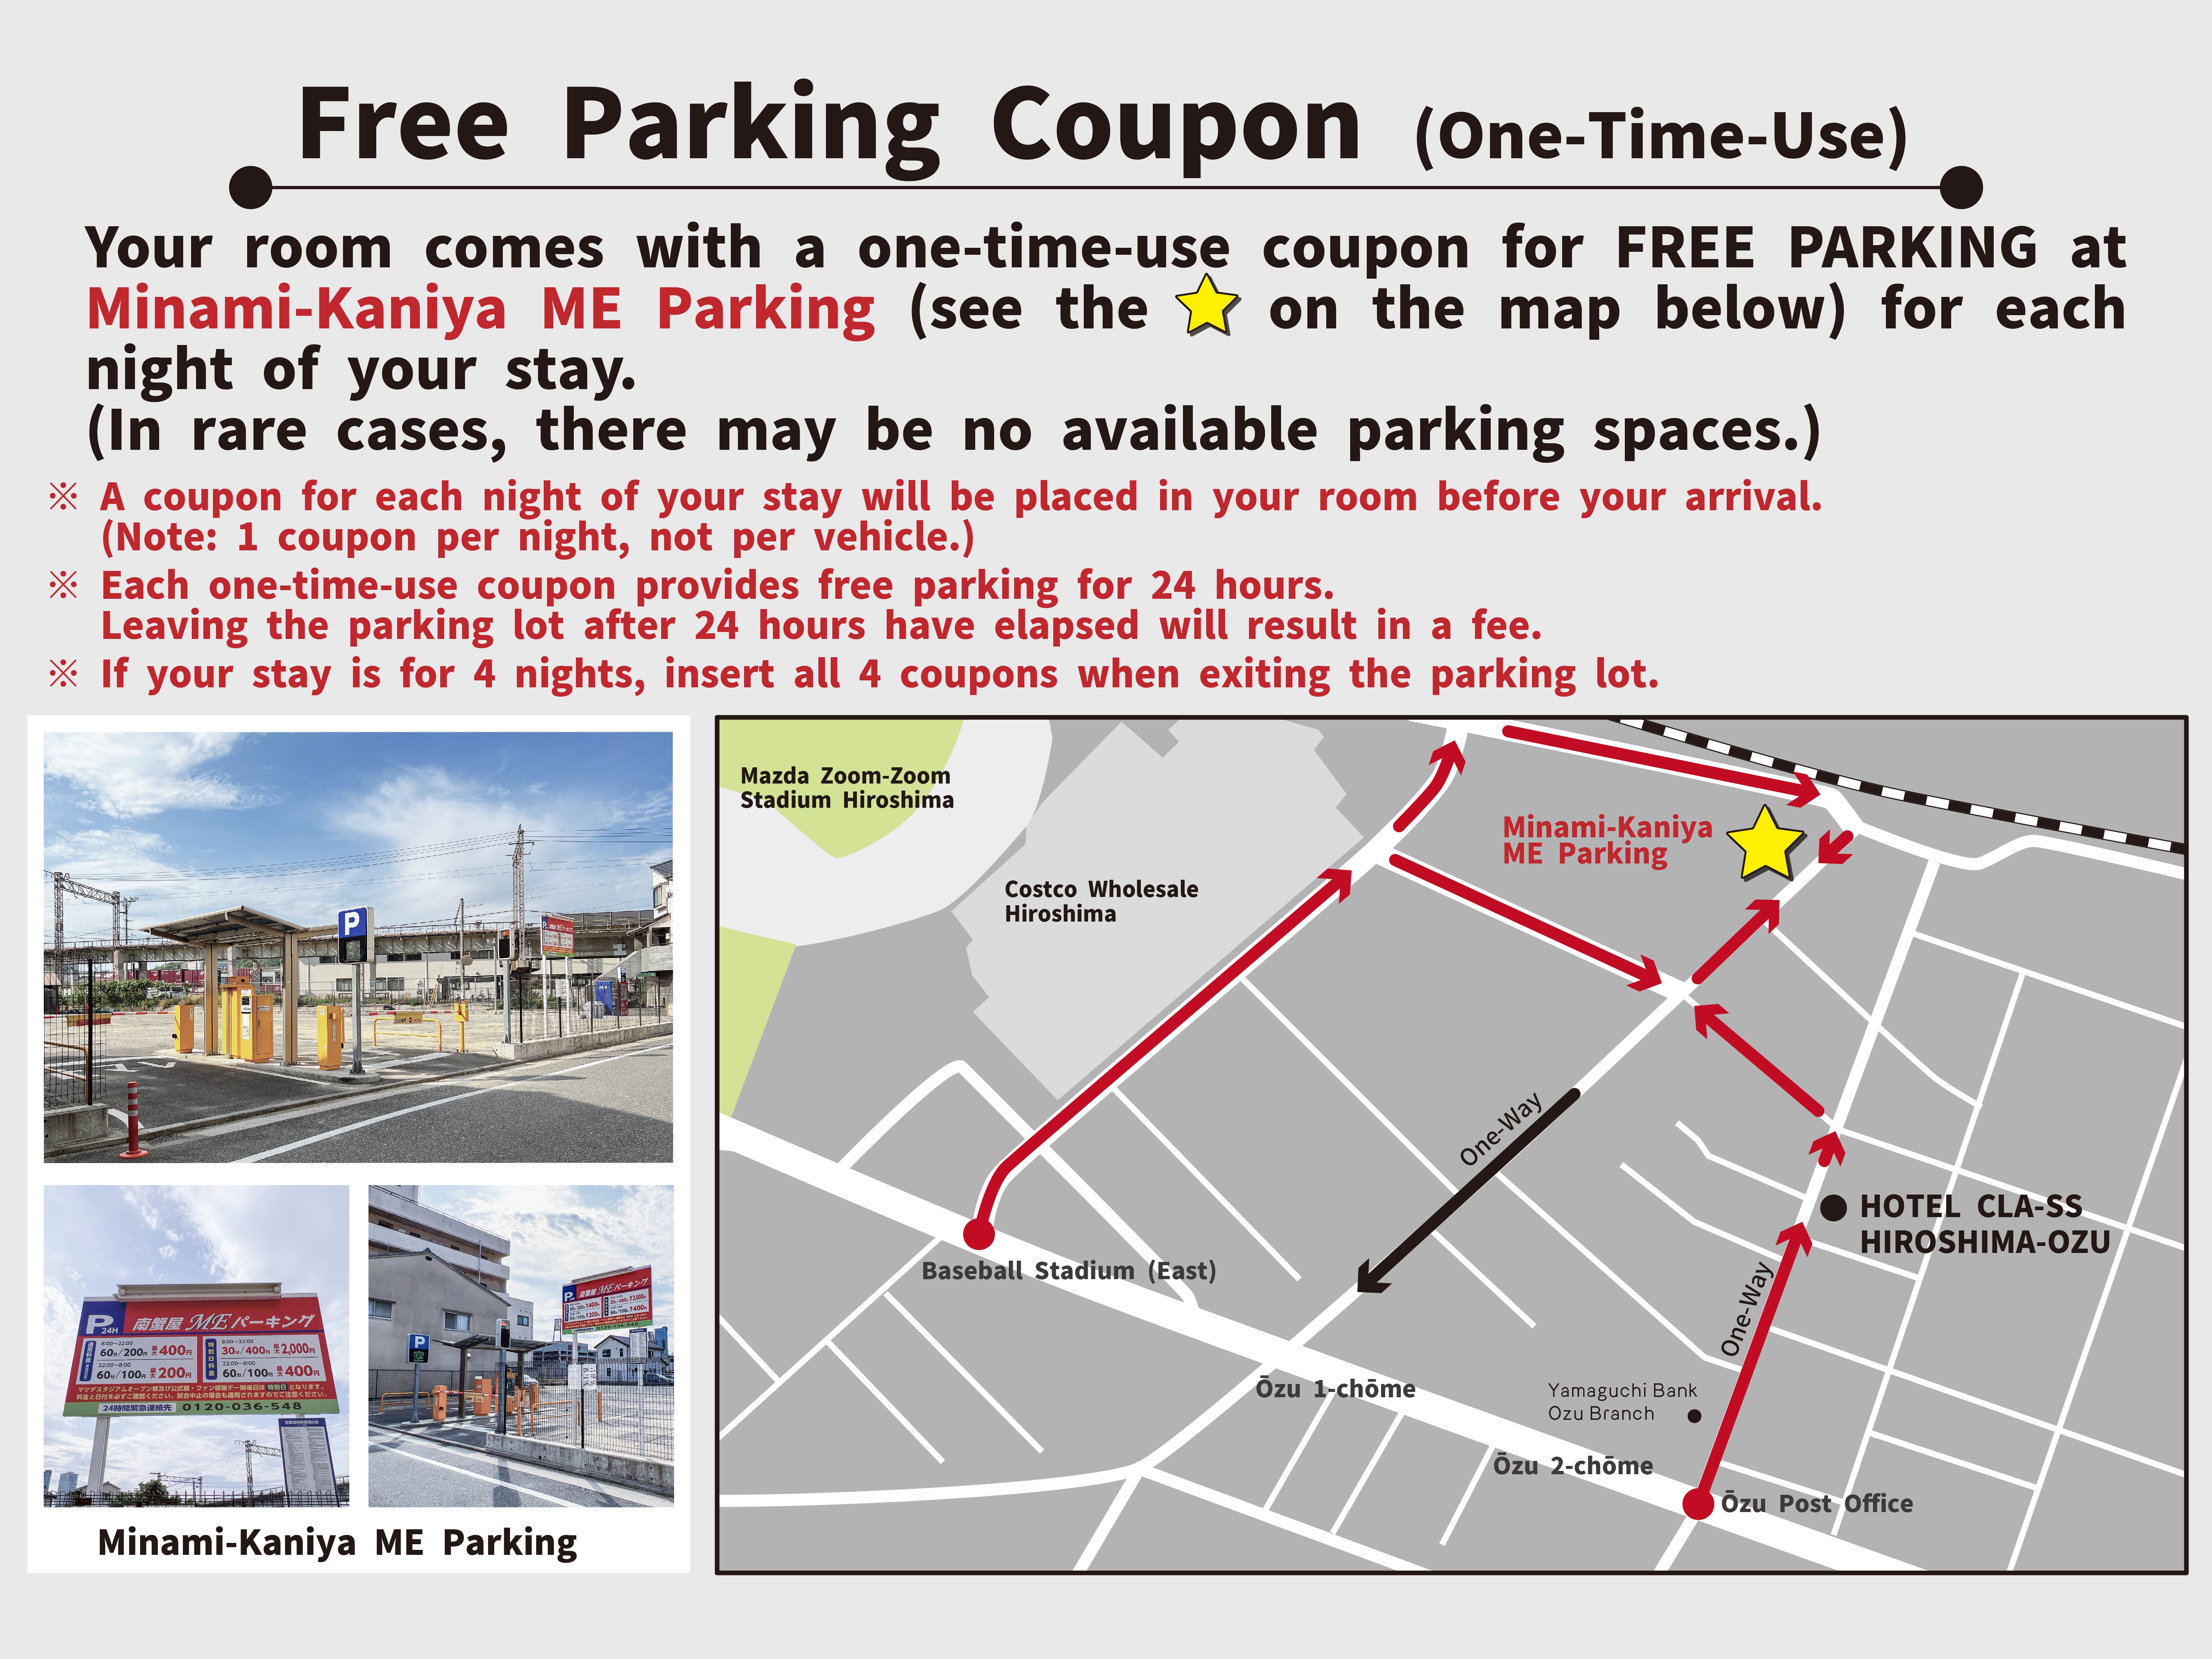 Parking Lot Directions (English)